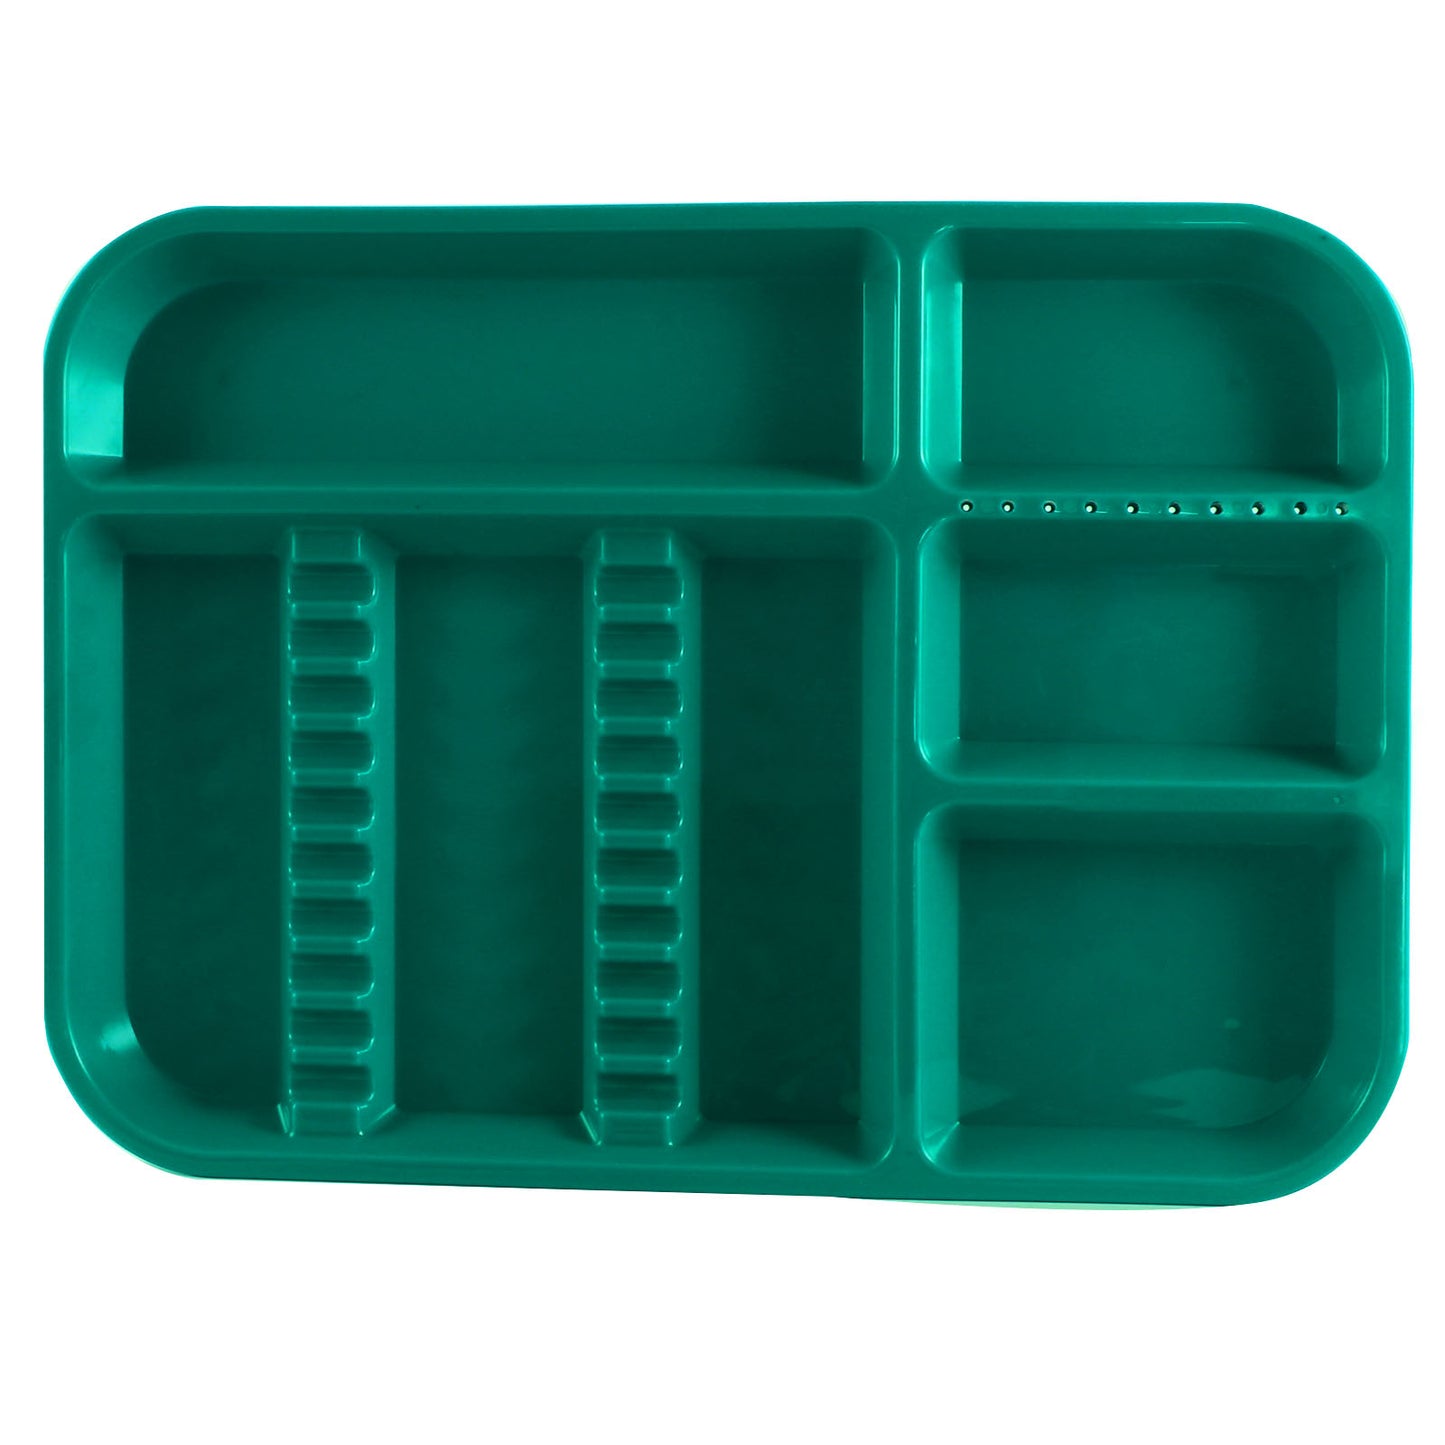 Dental Instrument Divided Tray, Autoclavable Divided Setup Tray, Divided Separate B-Lok Divided Tray, Size B (Ritter) - Plastic, 13-3/8" x 9-5/8" x 7/8"